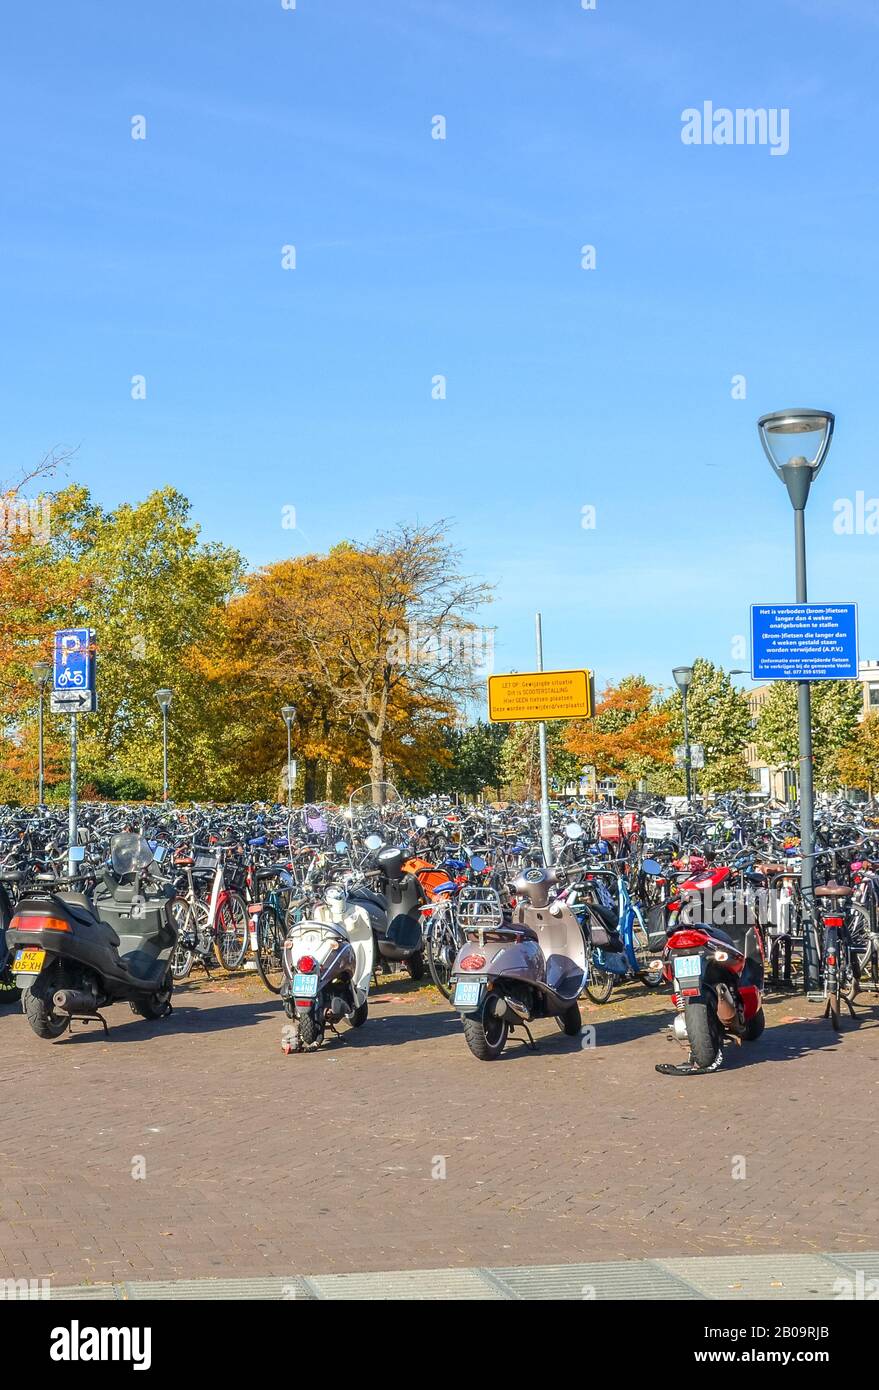 Venlo, Limburg, Netherlands - October 13, 2018: Rows of parked bicycles and motorcycles in the Dutch city close to the main train station. City biking. Eco-friendly means of transport. Vertical photo. Stock Photo